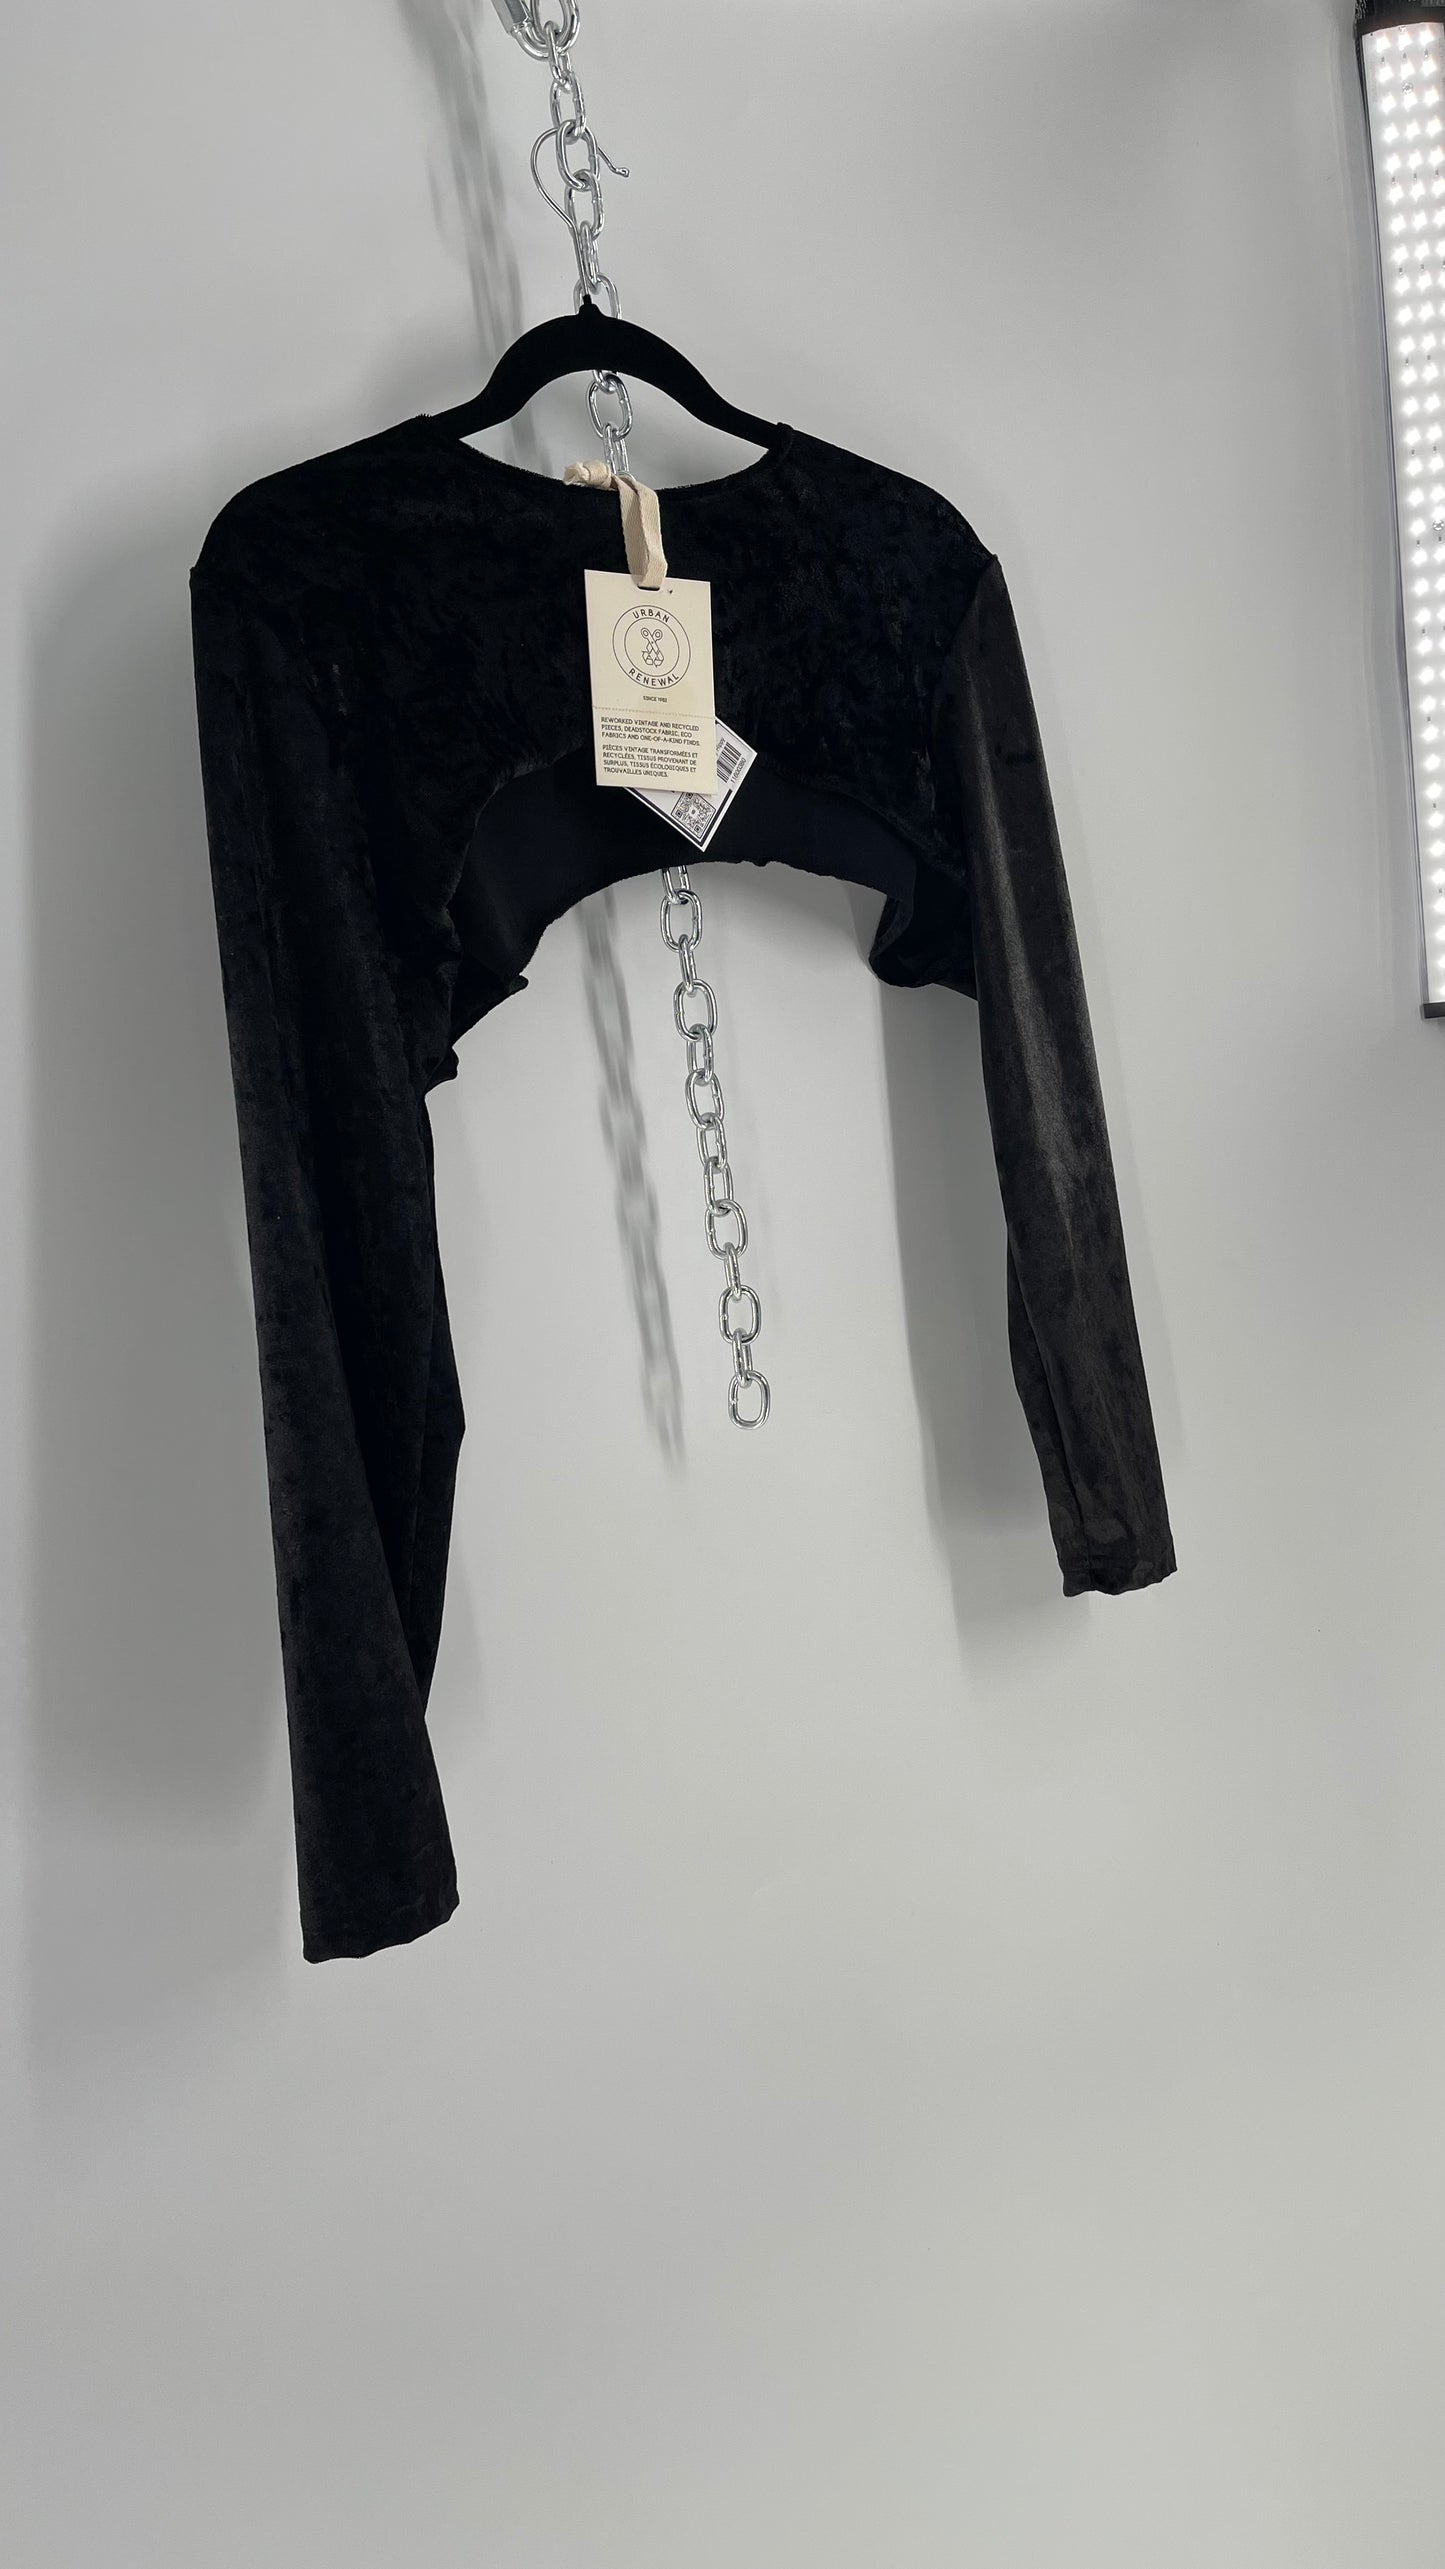 Urban Outfitters Black Velvet Layering Shrug Top (One Size)